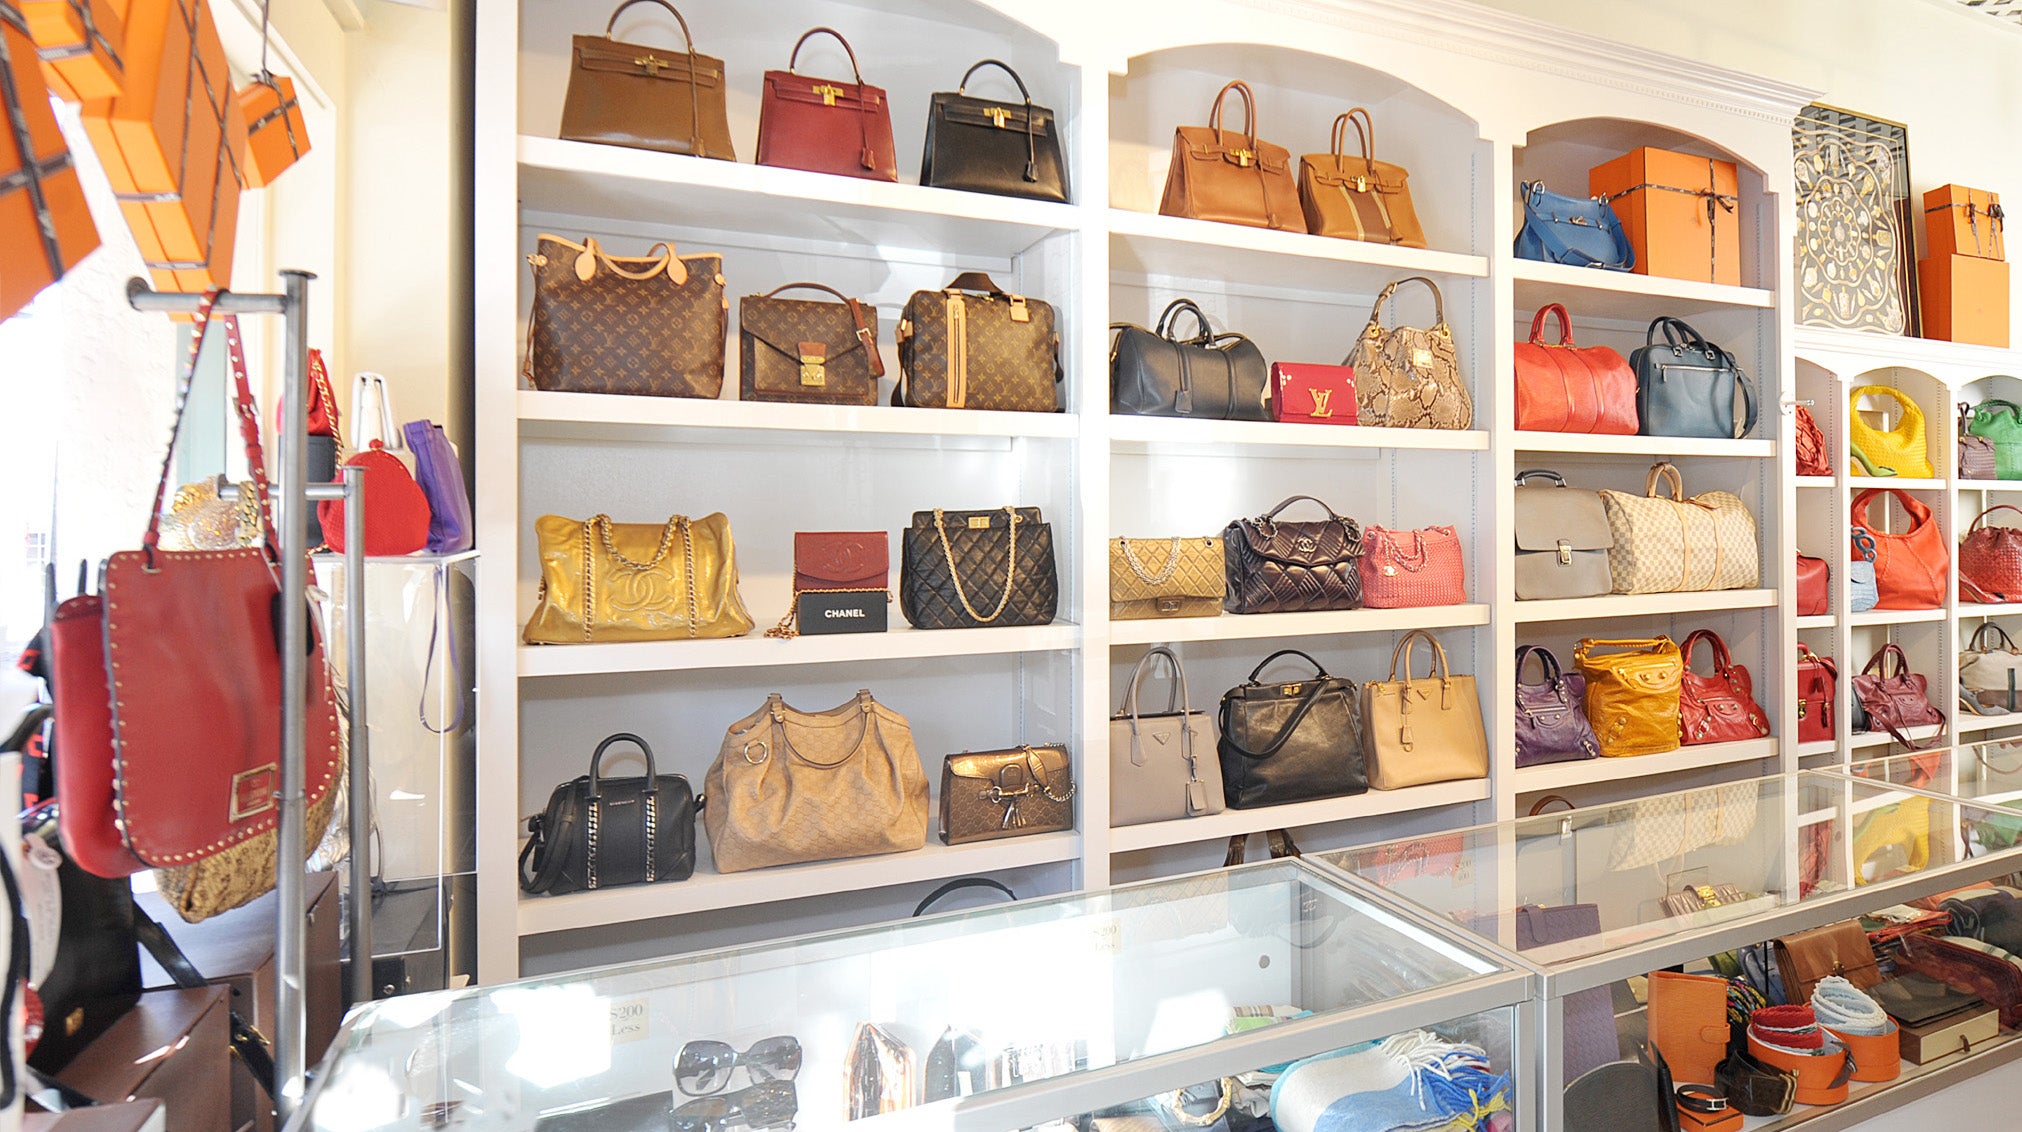 REAL DEAL COLLECTION - Luxury Handbag Consignment